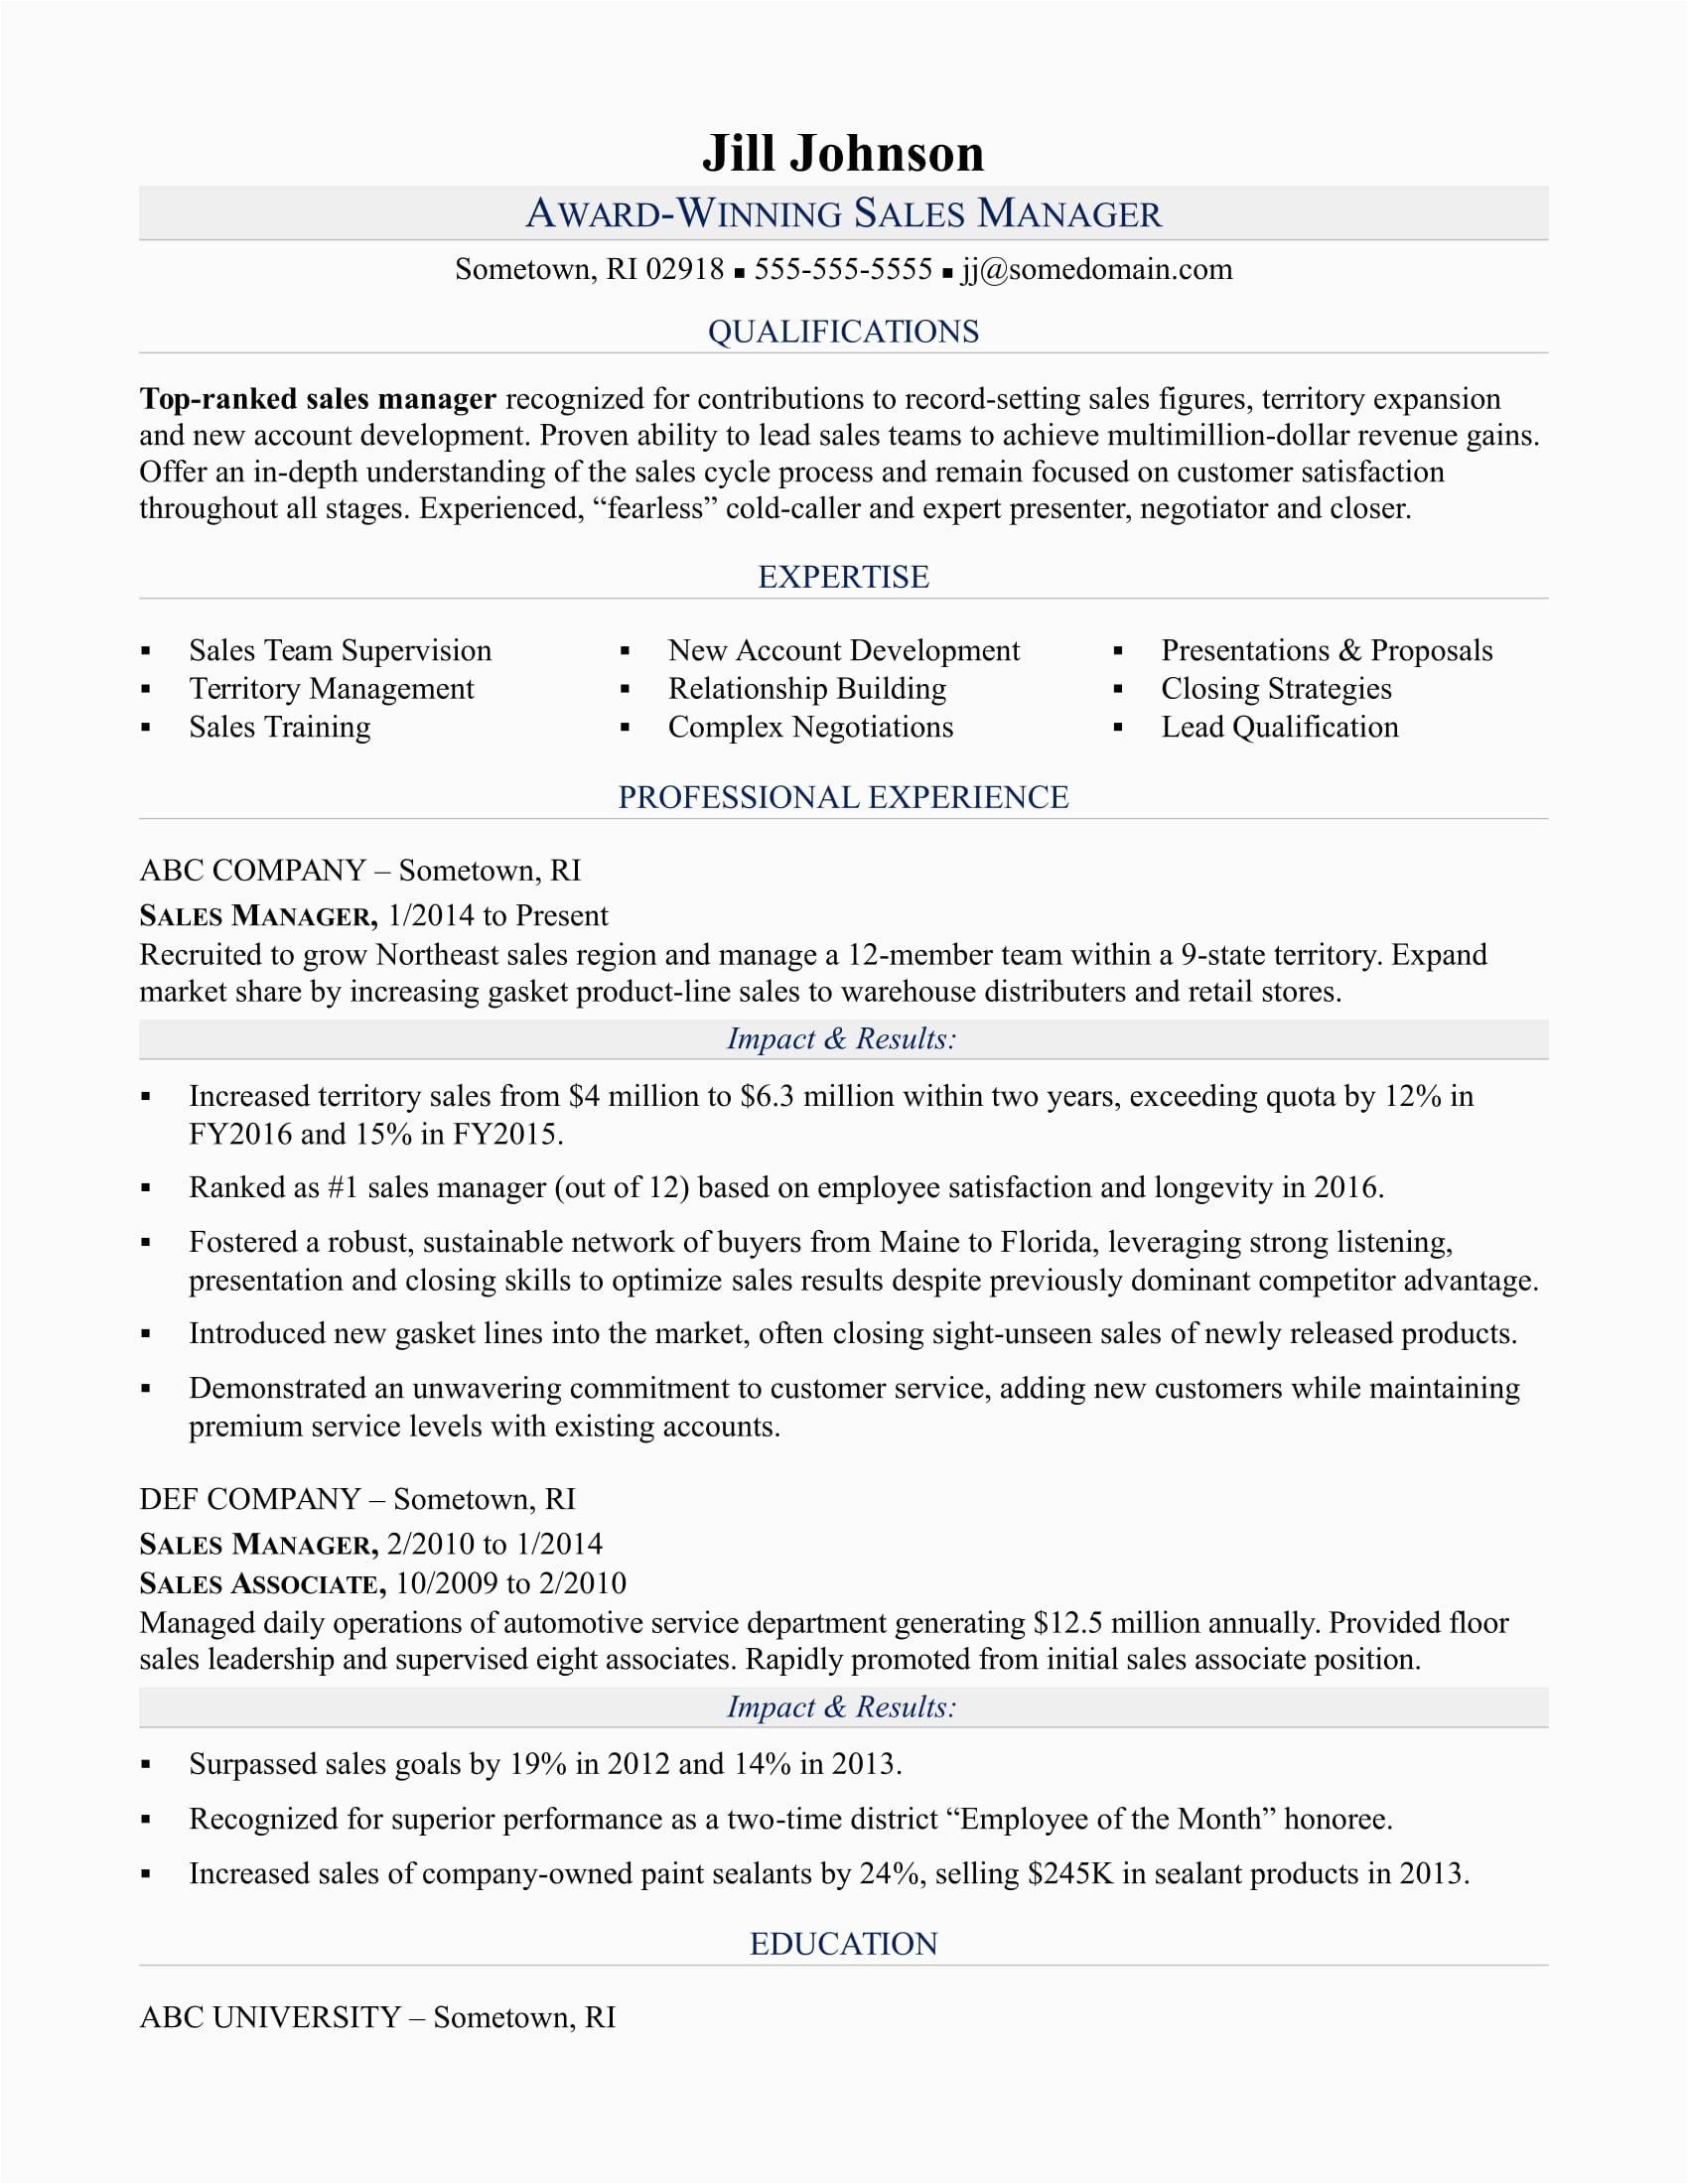 Sales and Service Manager Resume Sample Sales Manager Resume Sample